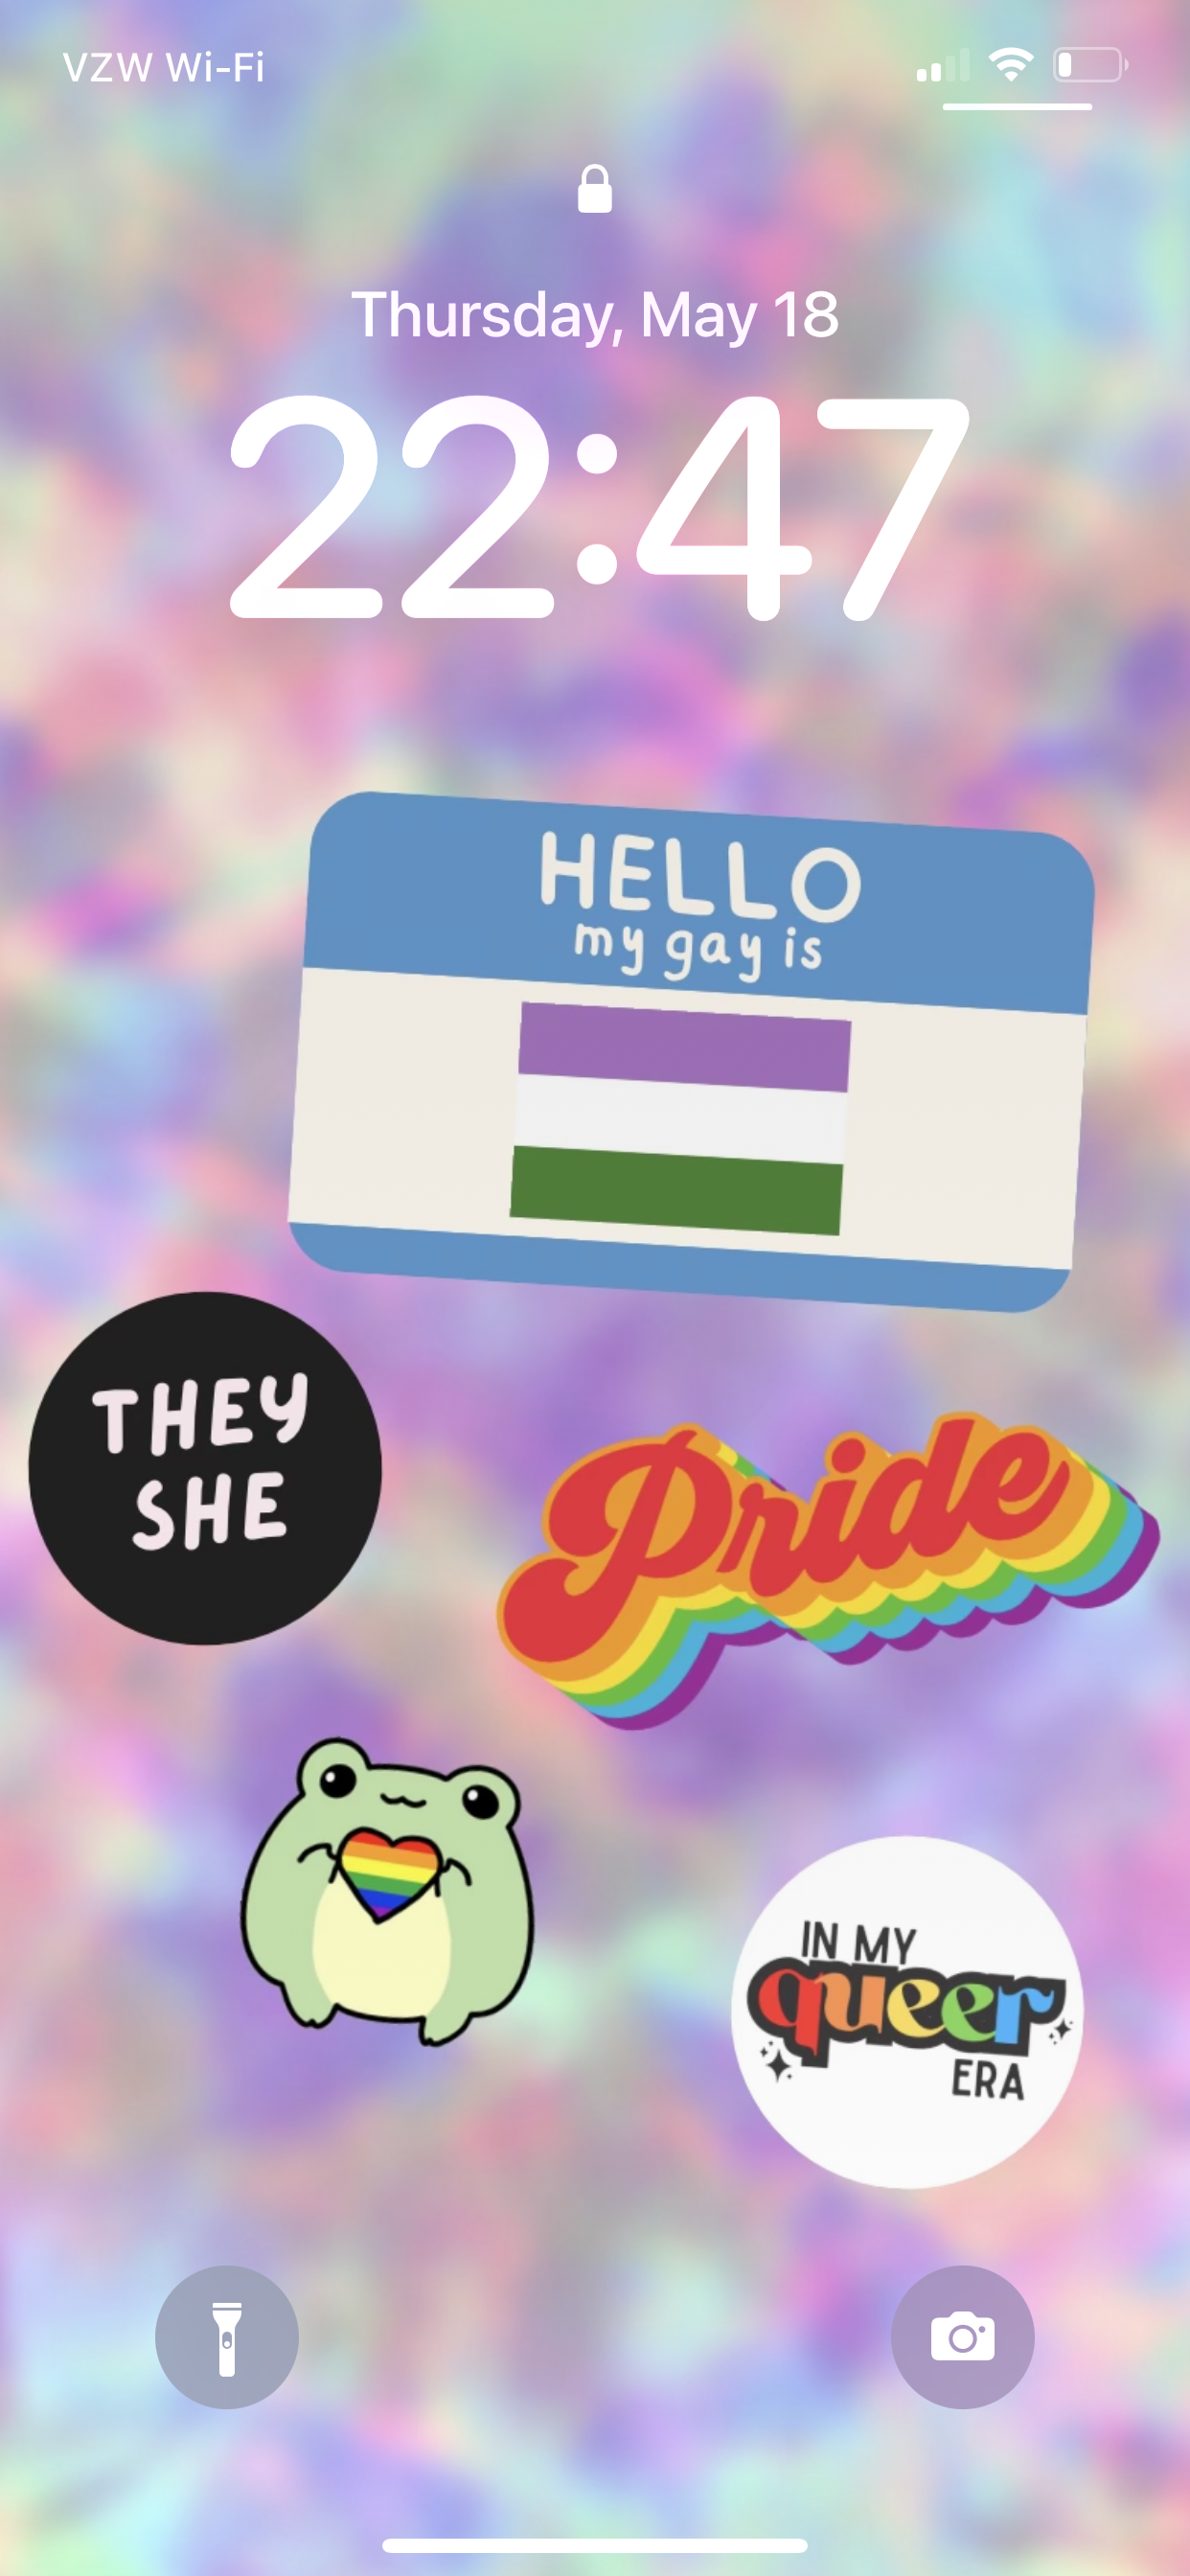 A screenshot of the pride wallpaper featuring the genderqueer flag and they/she pronouns.